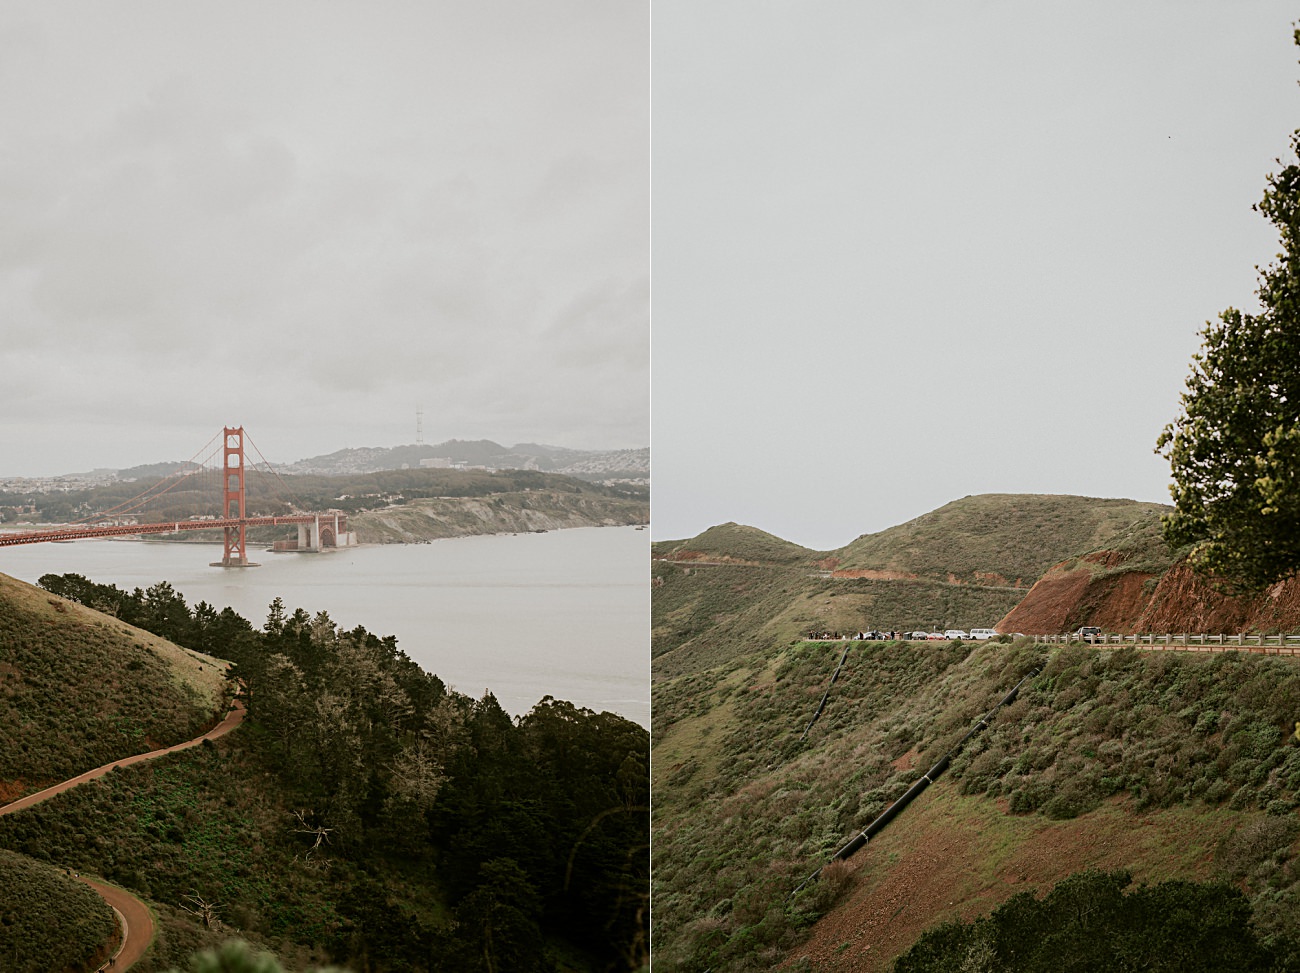 Hikes in San Francisco, Golden Gate Bridge, National Parks, Osprey Hiking Pack, Gluten Free Bakery, Sutro Baths San Fransisco, Travel Guide for San Francisco, California Blogger - Natural Intuition Photography